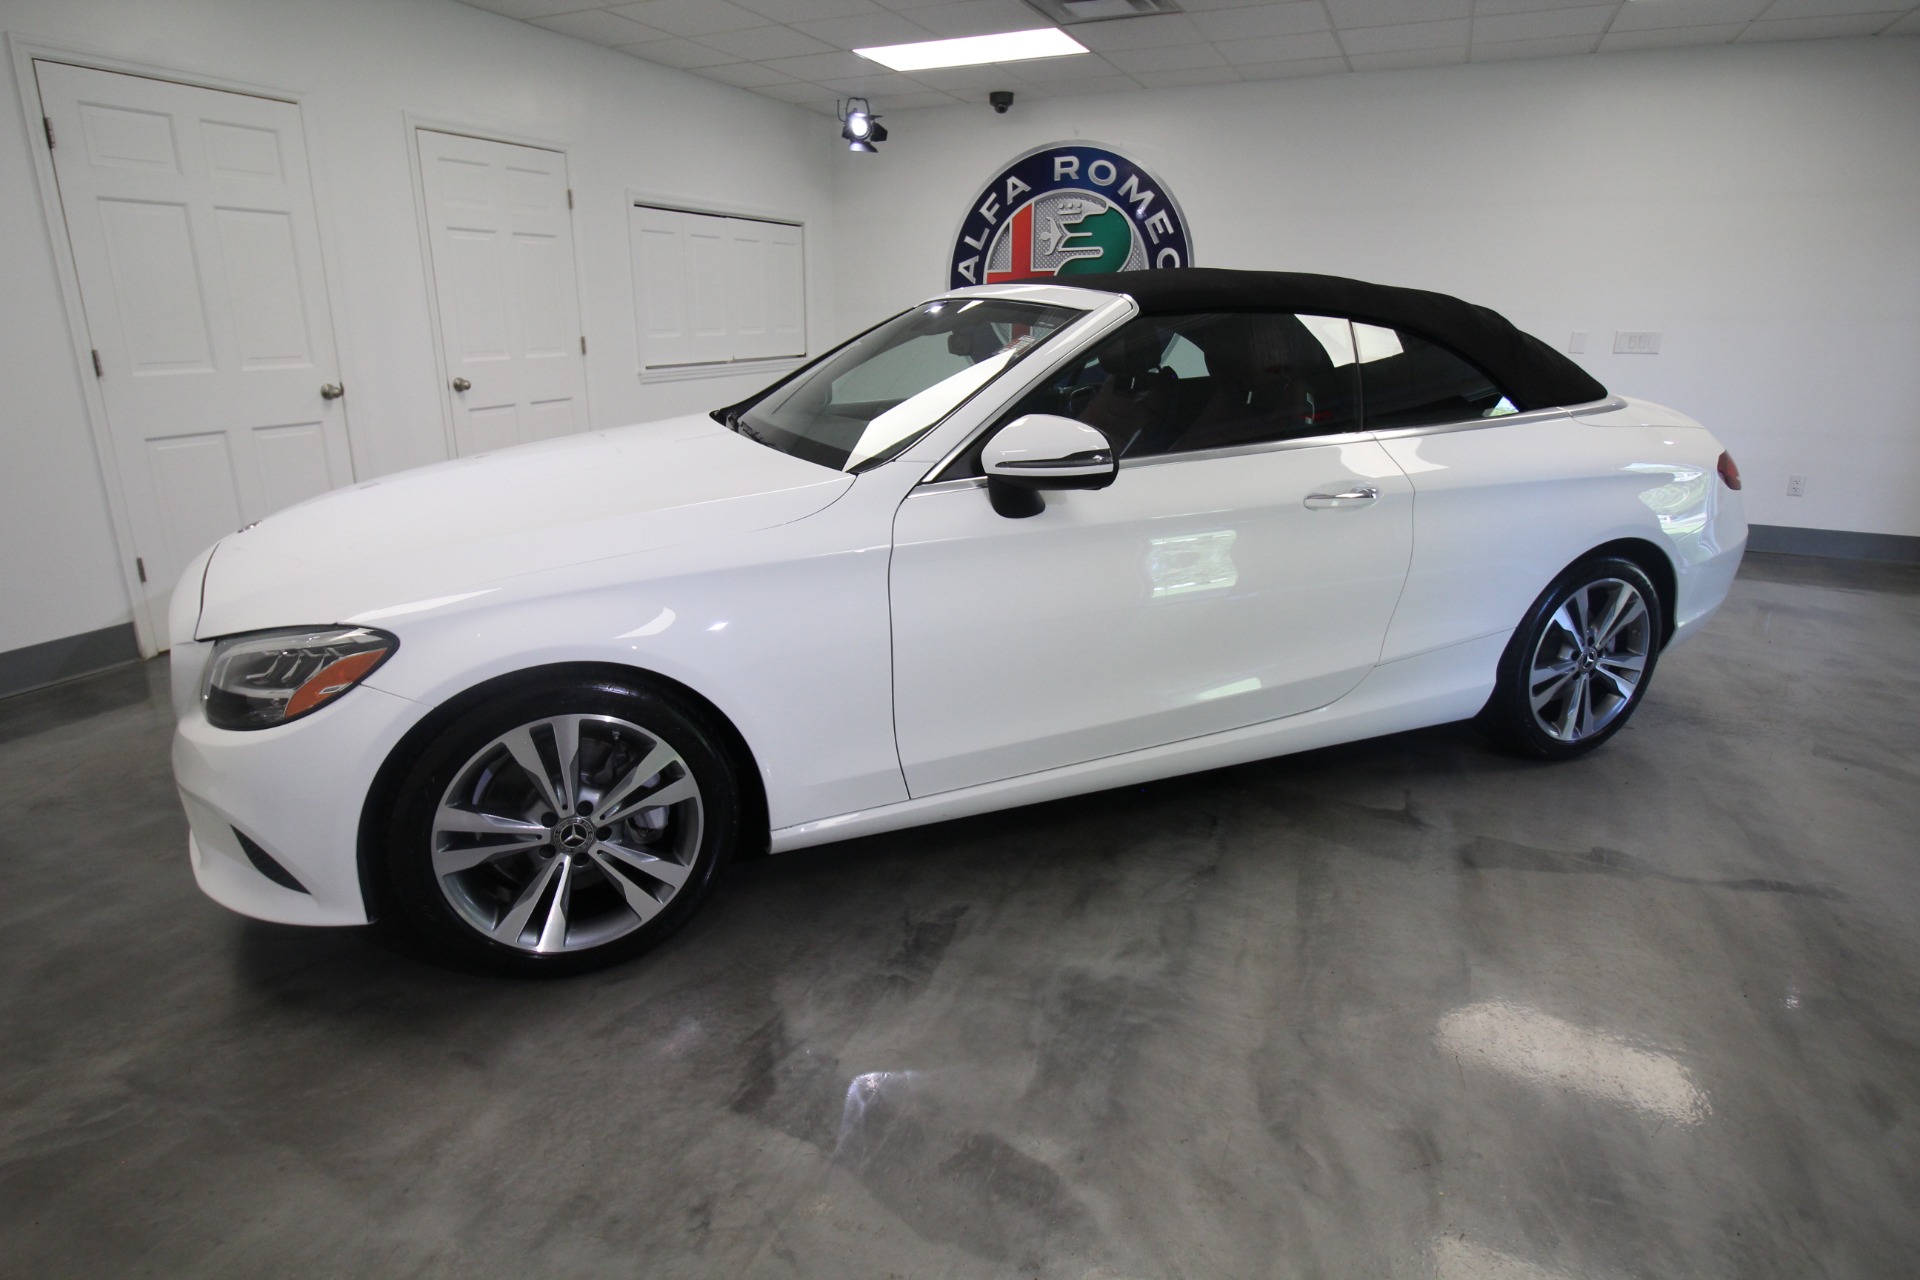 Used 2019 White Mercedes-Benz C-Class C300 4Matic Convertible Gorgeous Color Combo | Albany, NY